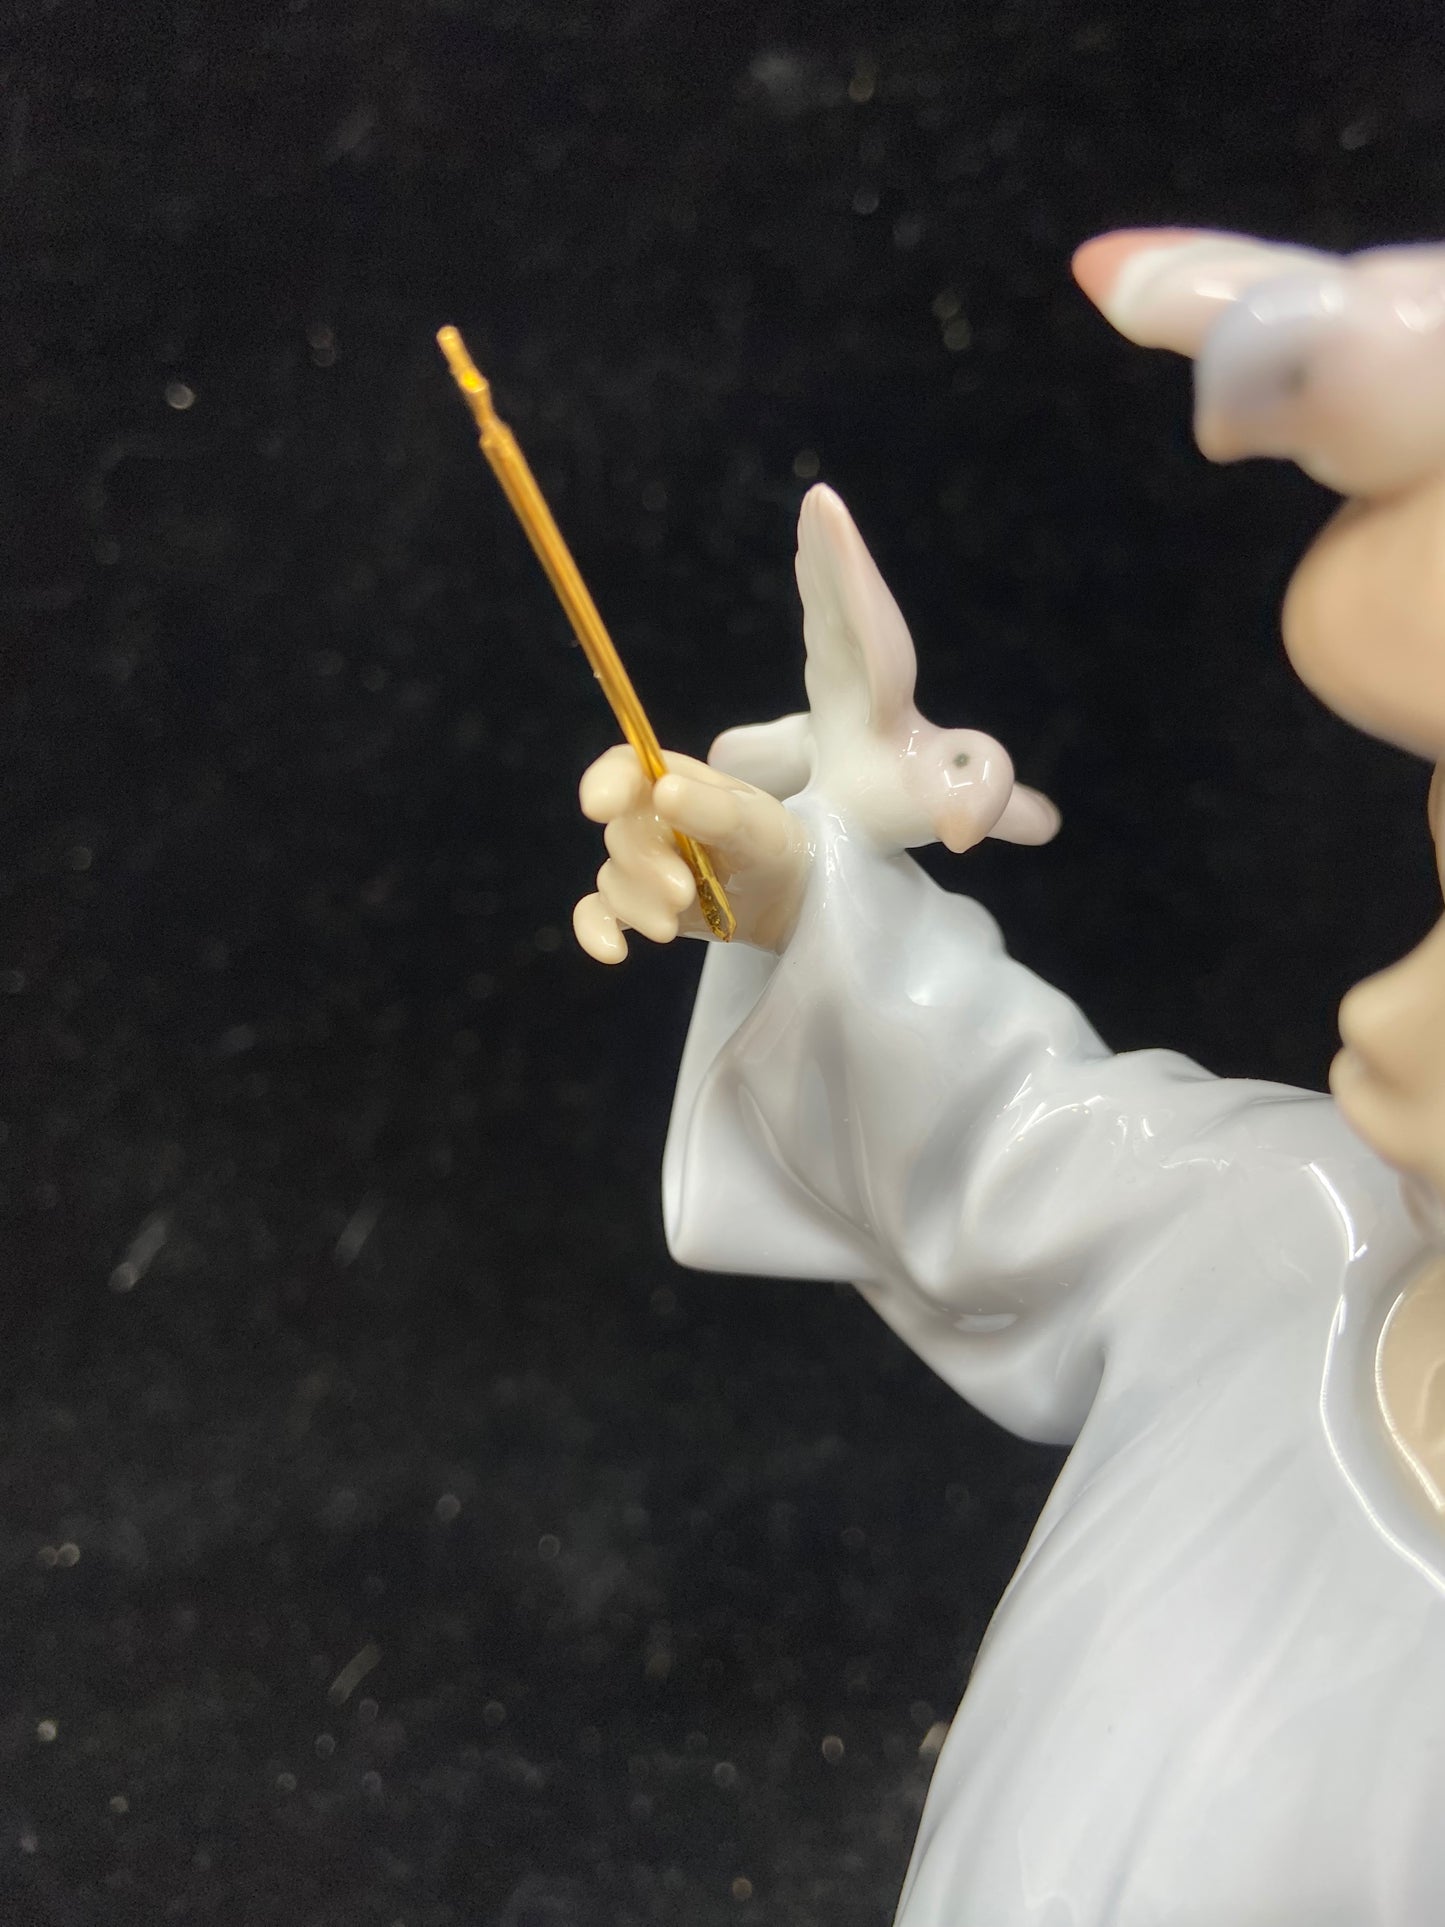 Lladro #1671 Magical Moments Signed Figurine (26383)